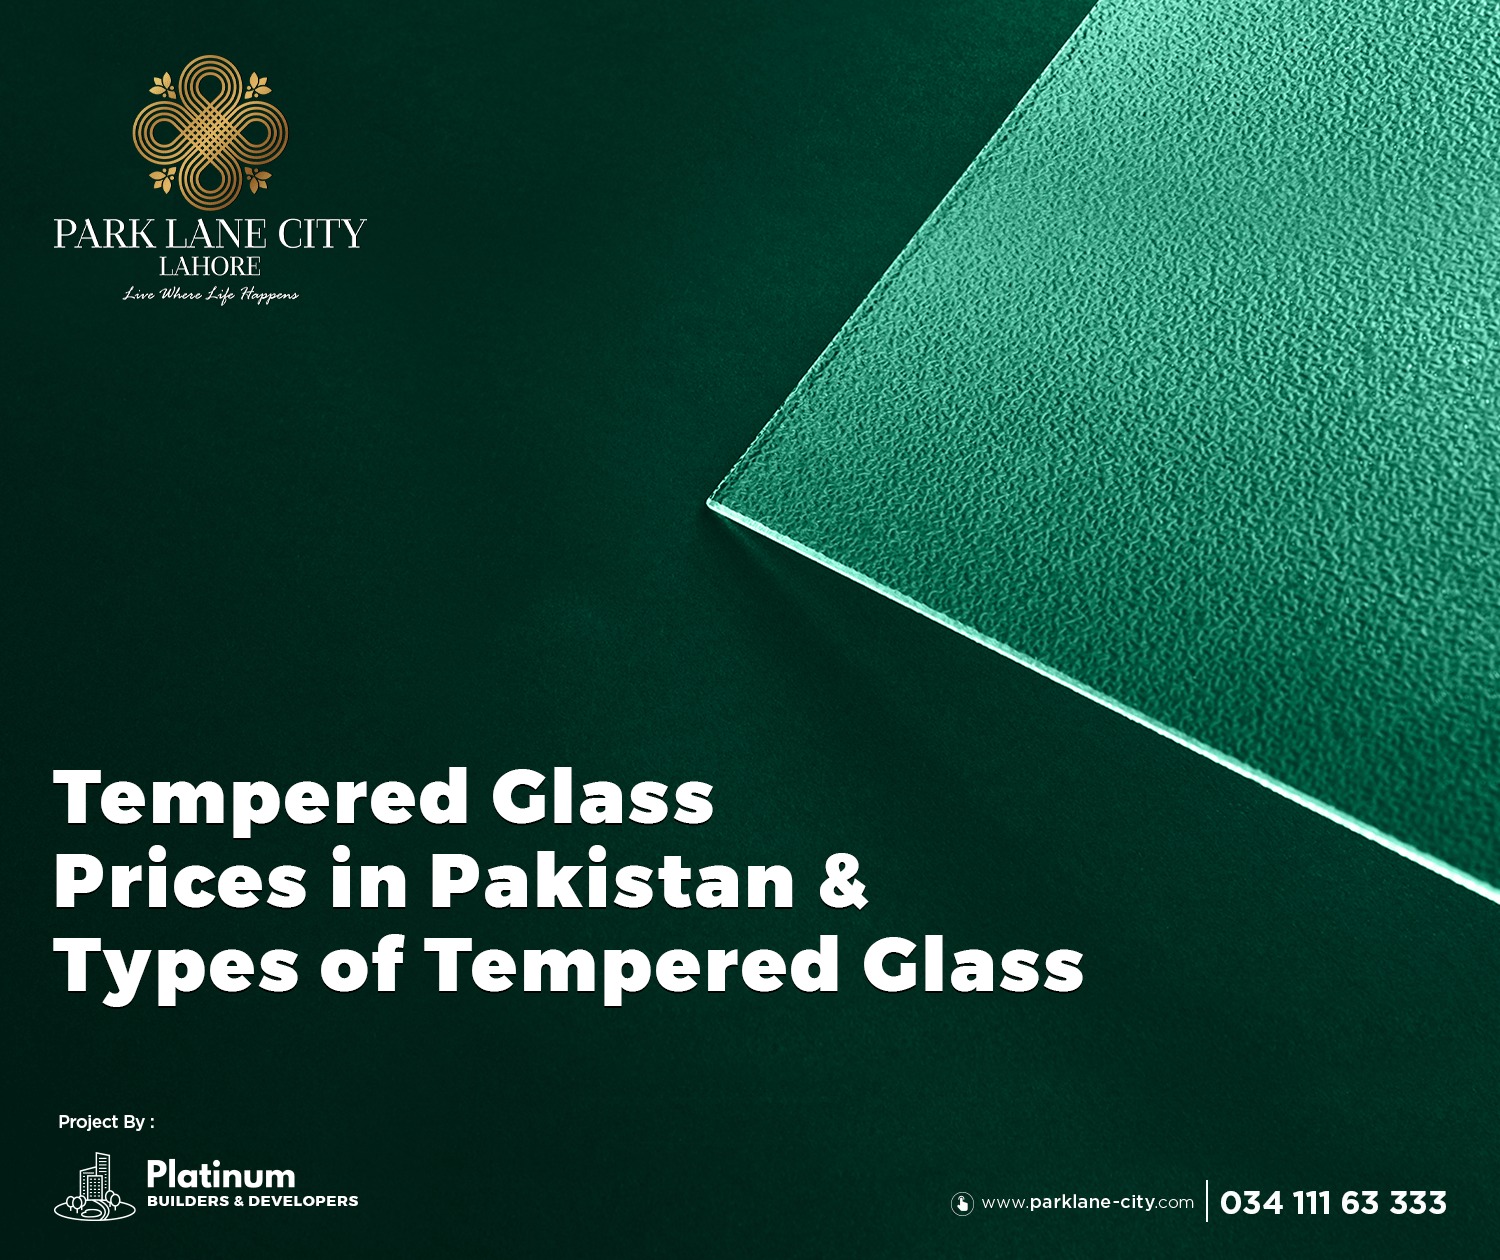 Tempered Glass Prices in Pakistan